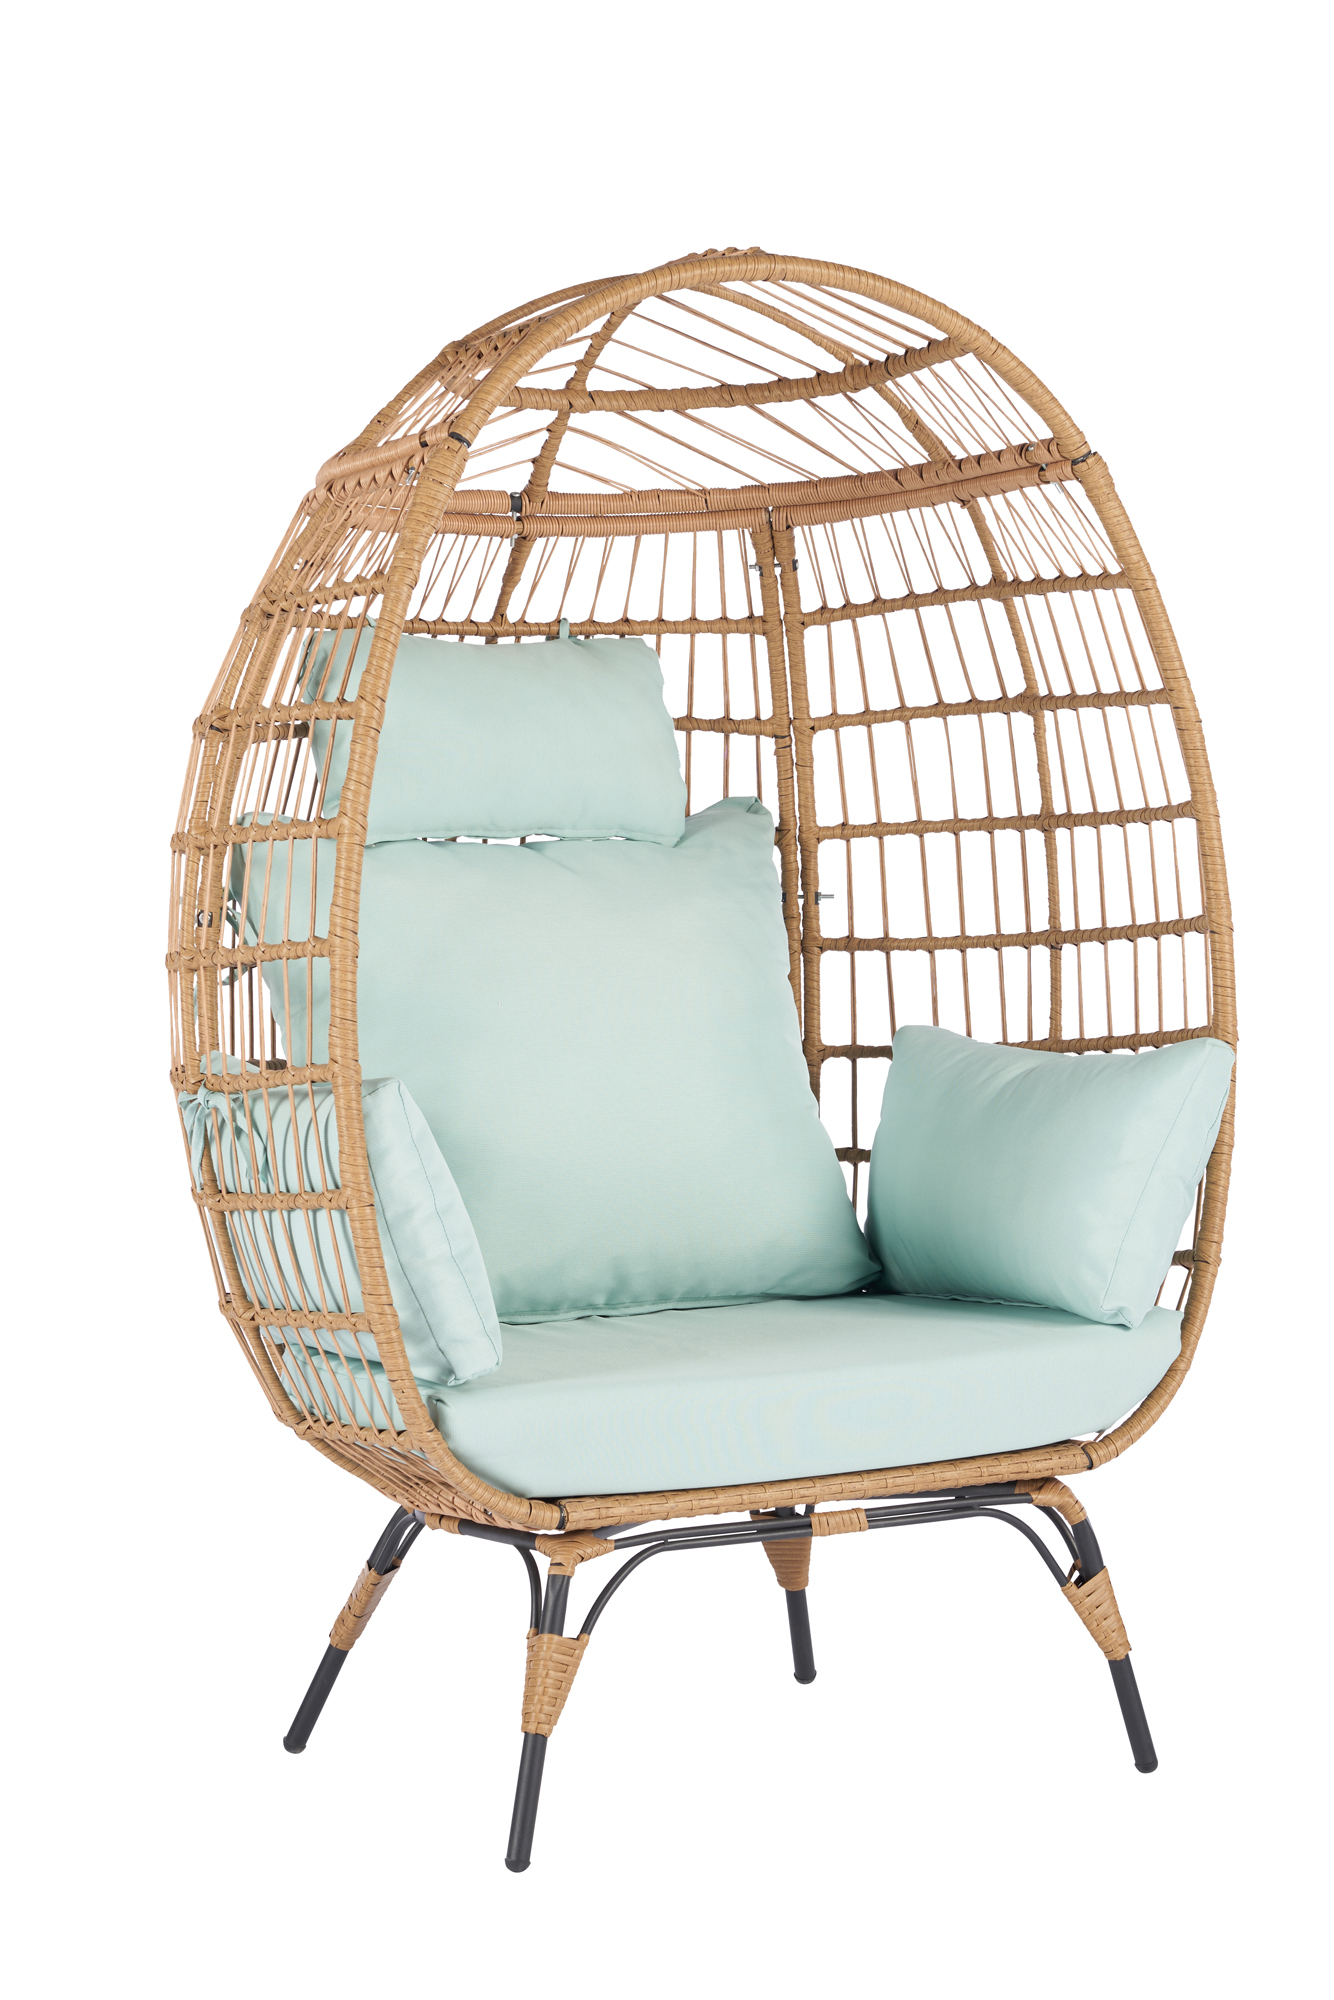 Wicker Egg Chair, Oversized Indoor Outdoor Boho Lounger Chair Stationary Egg Basket Chair, All-Weather 440lb Capacity Patio Chair, Blue - image 1 of 9